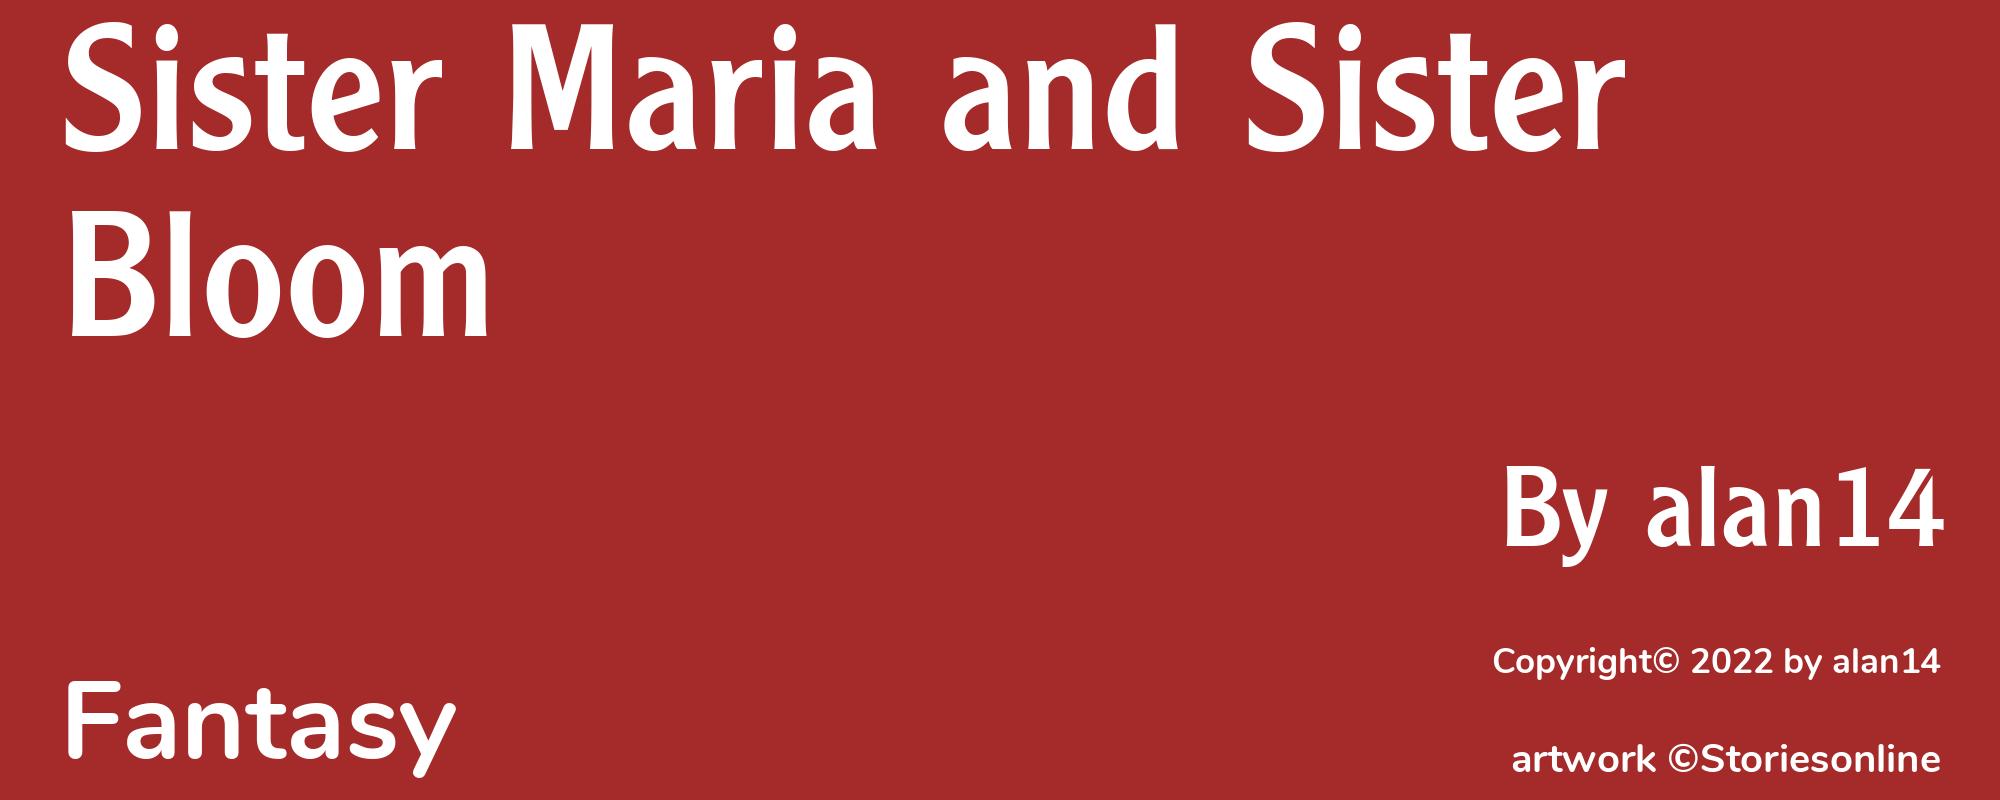 Sister Maria and Sister Bloom - Cover